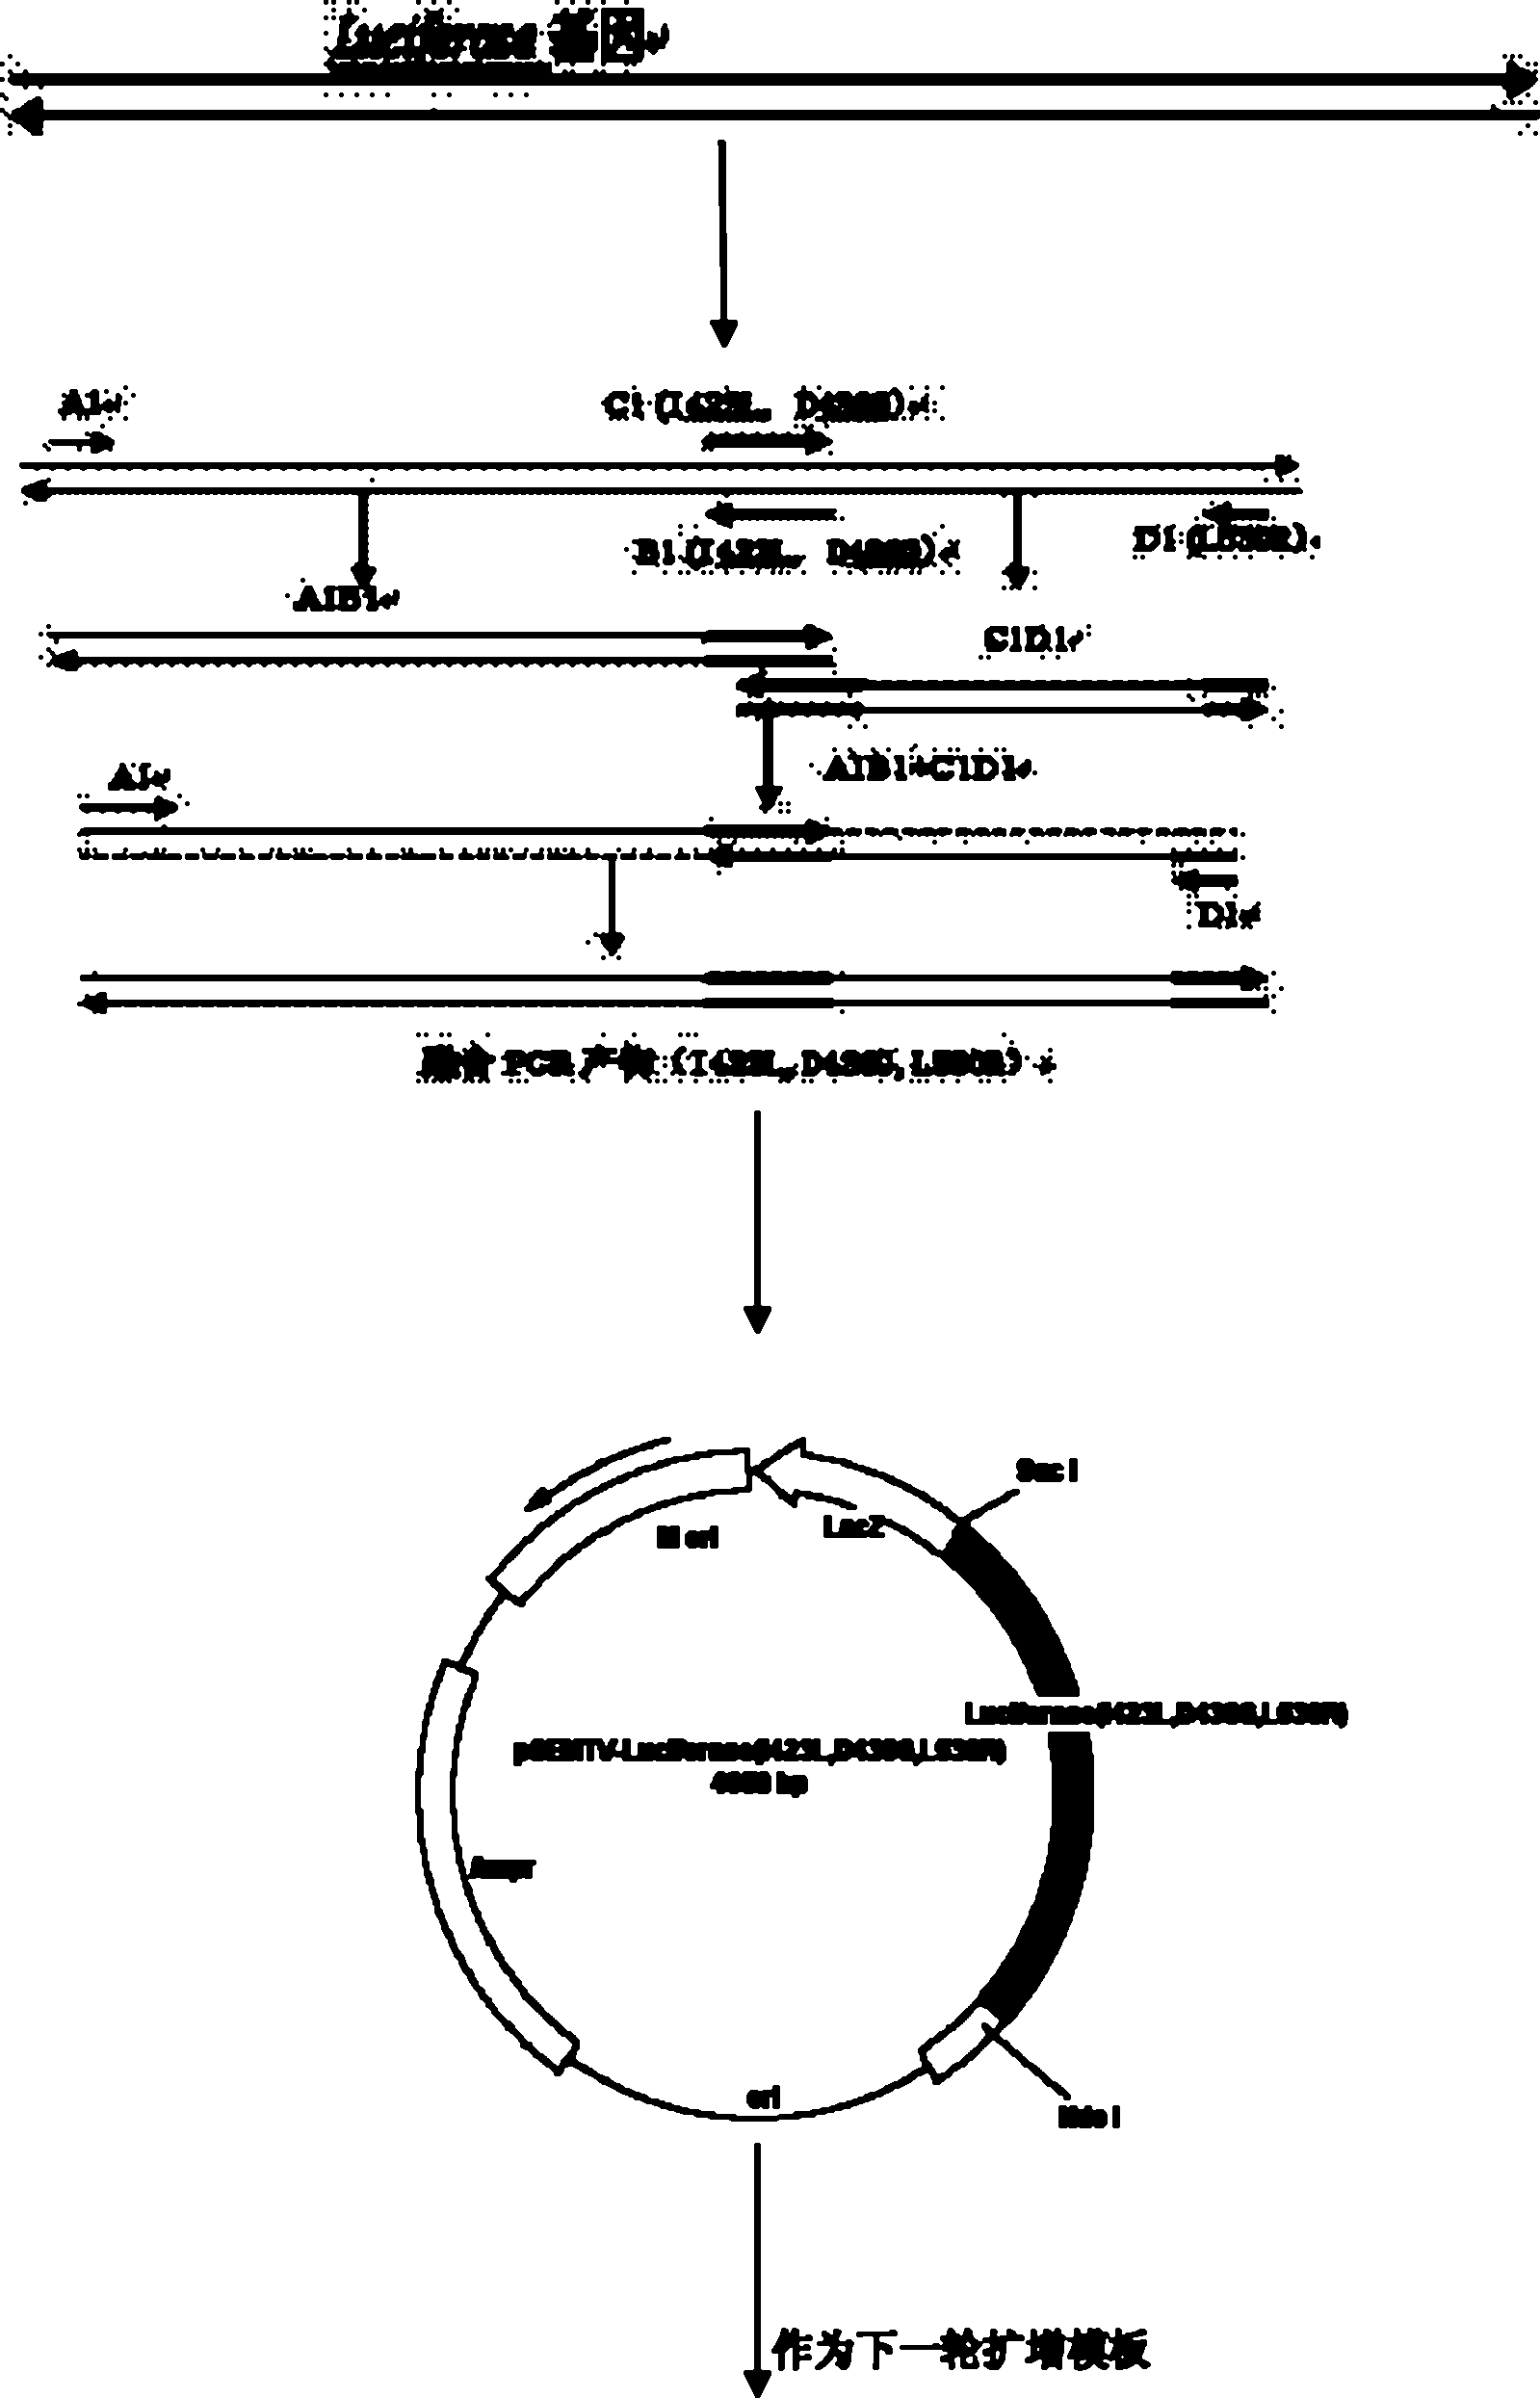 Gene encoding of firefly luciferase, its preparation method and application